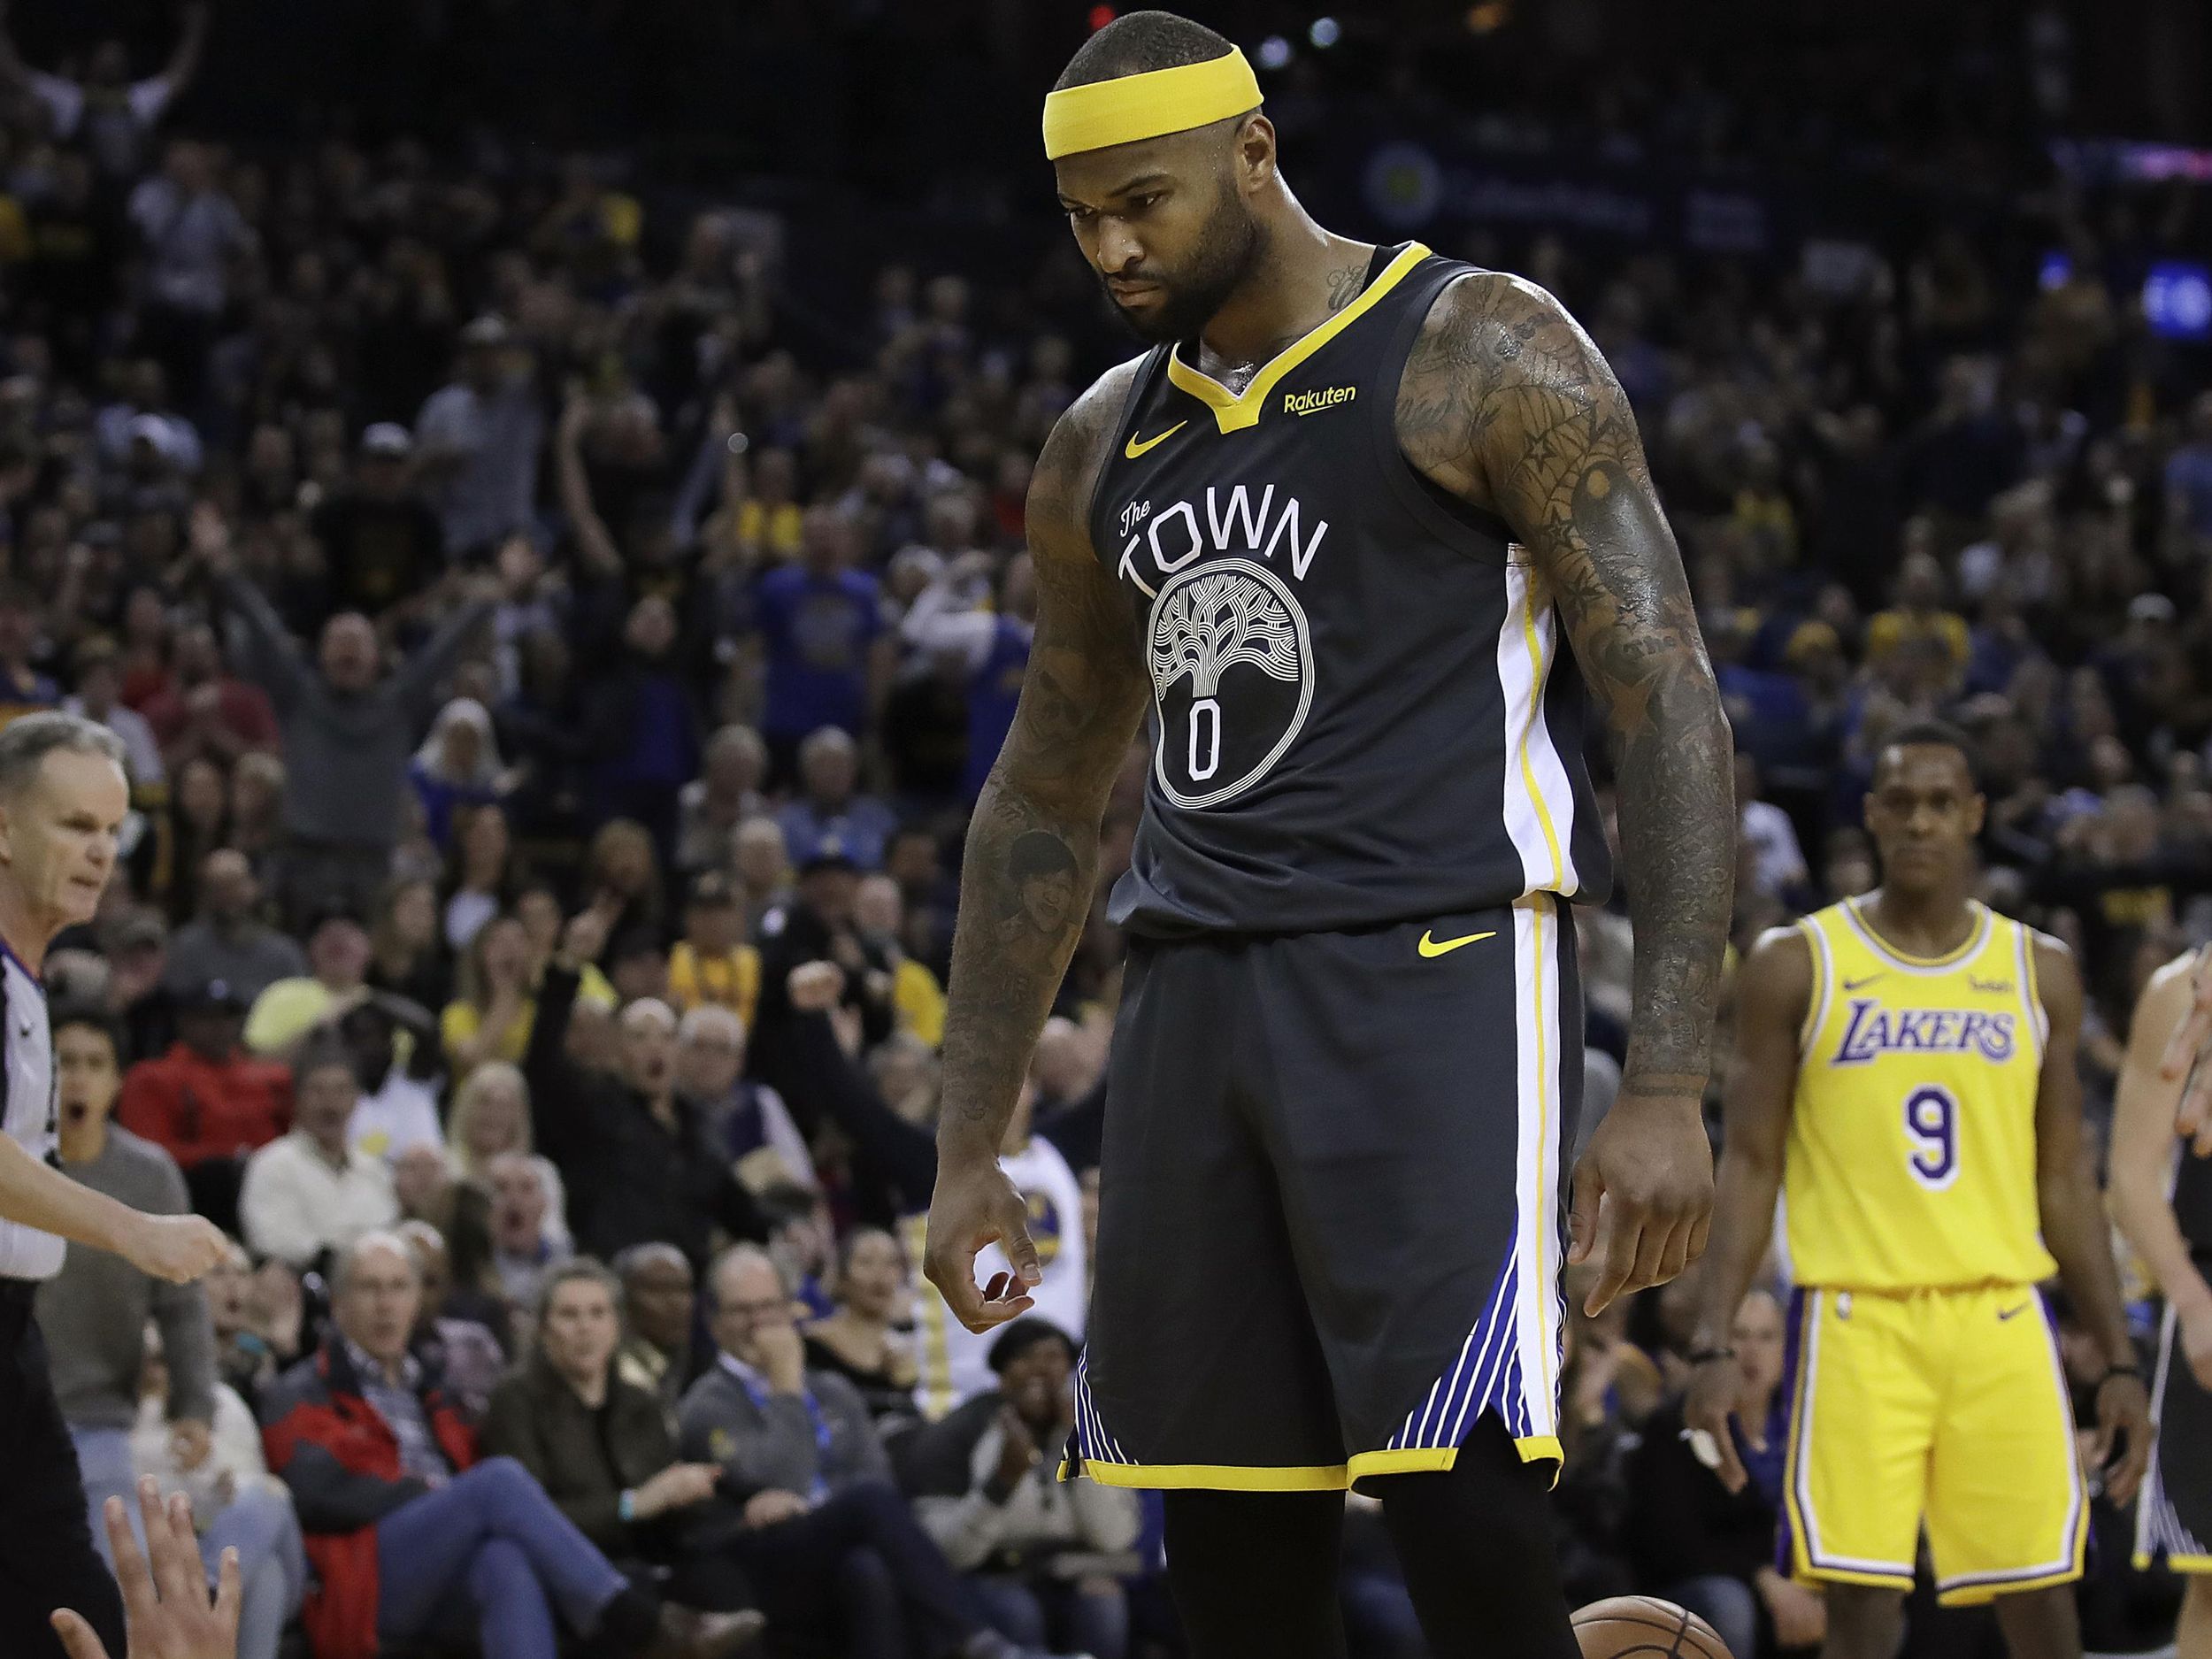 DeMarcus Cousins traded to Pelicans in blockbuster deal involving